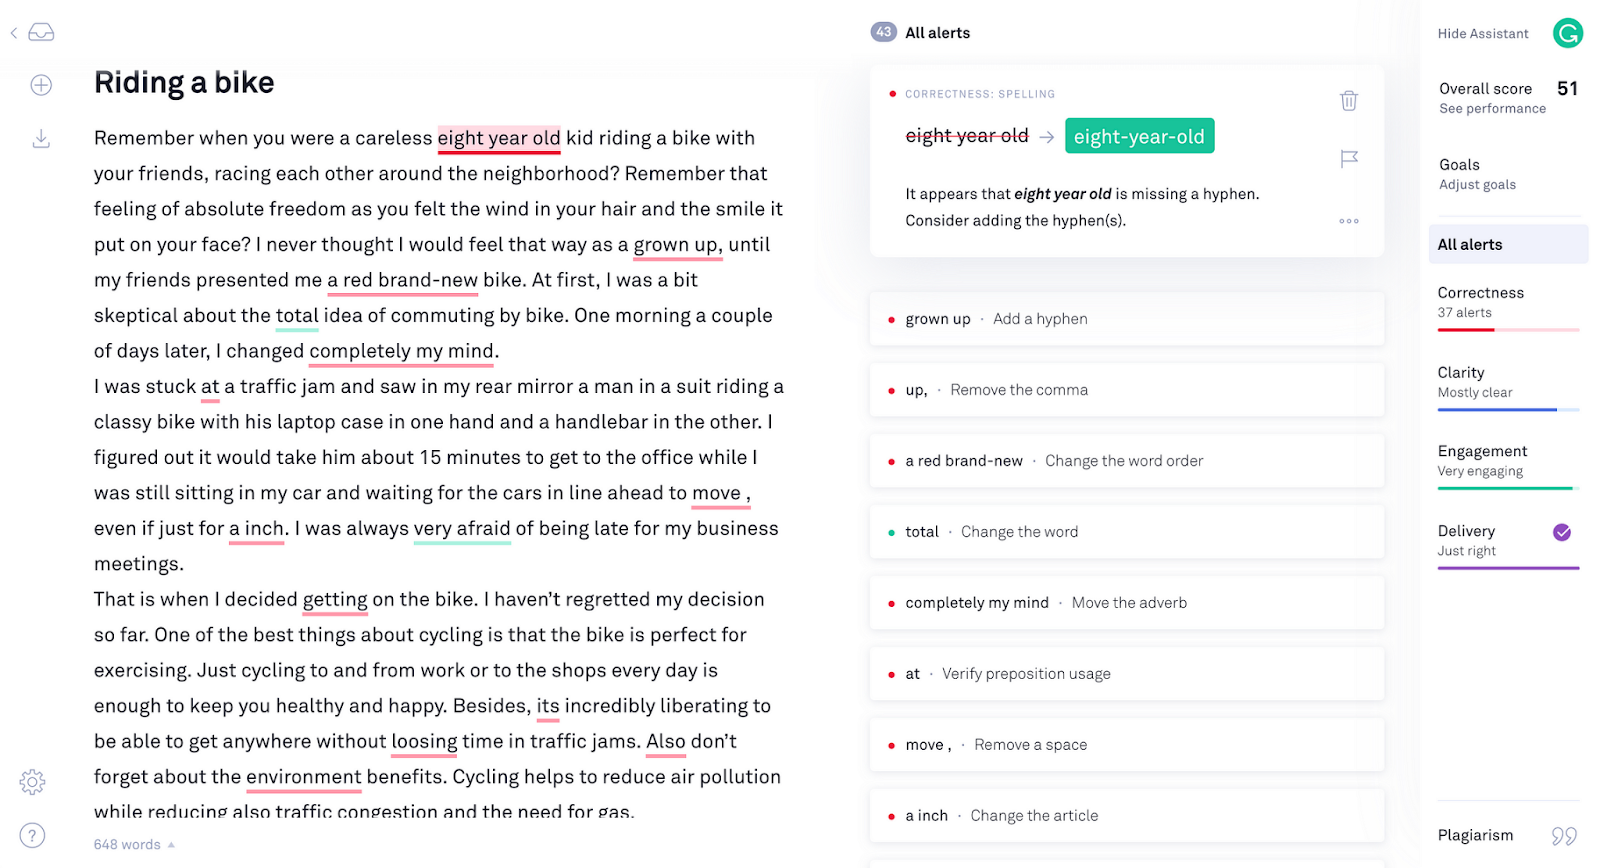 Grammarly app analyzing text about riding a bike.